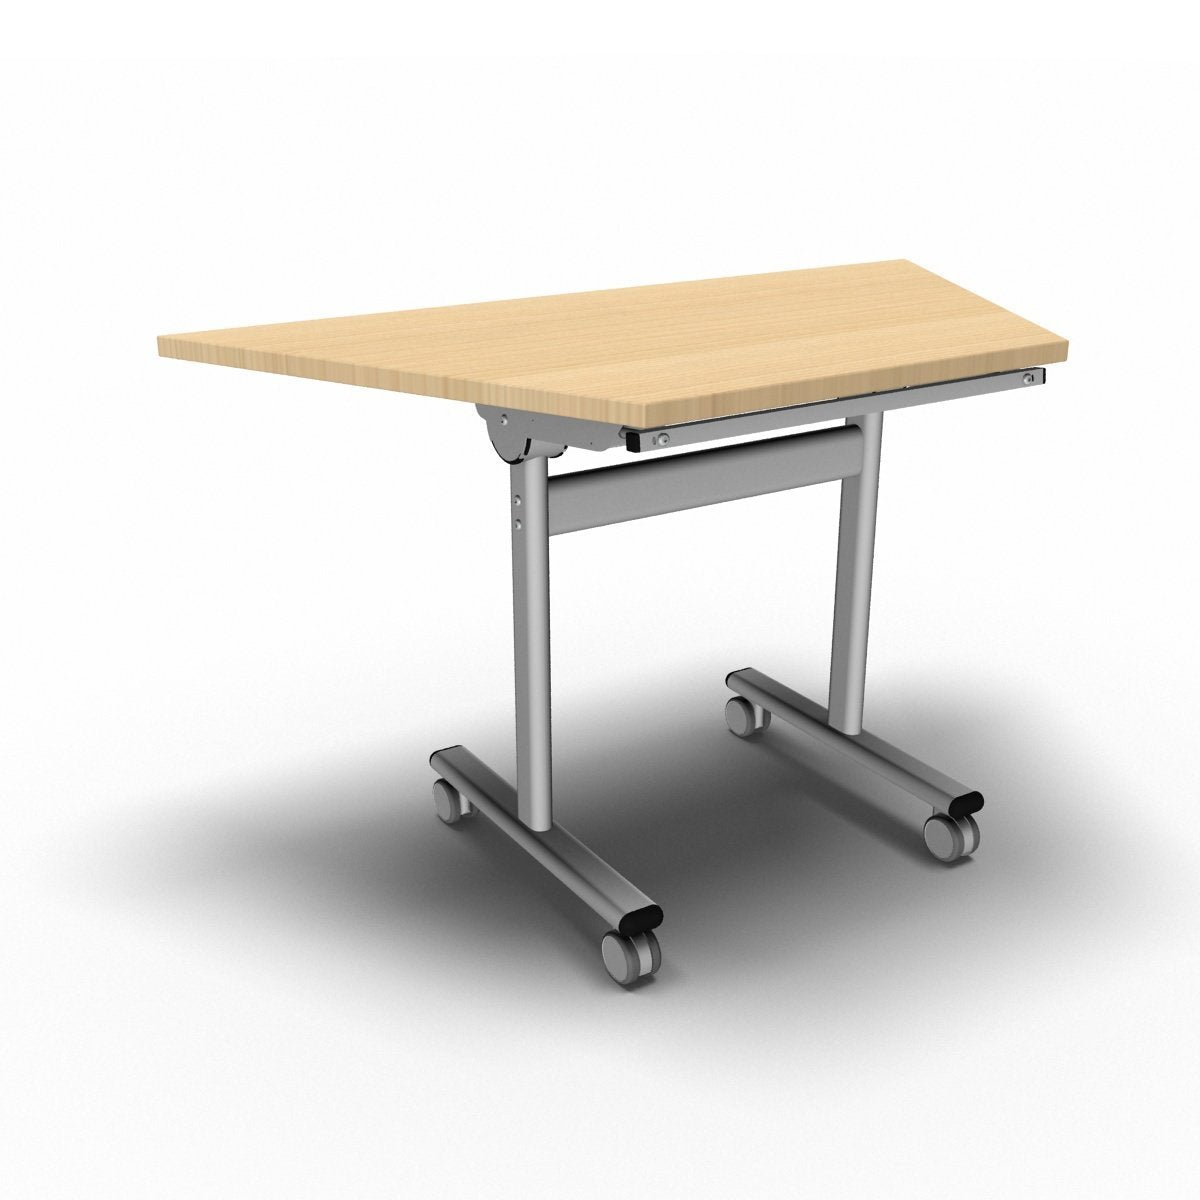 Table 1200 x 600 x 720mm / Trapezoidal / Maple Synergy Flip Top Tables